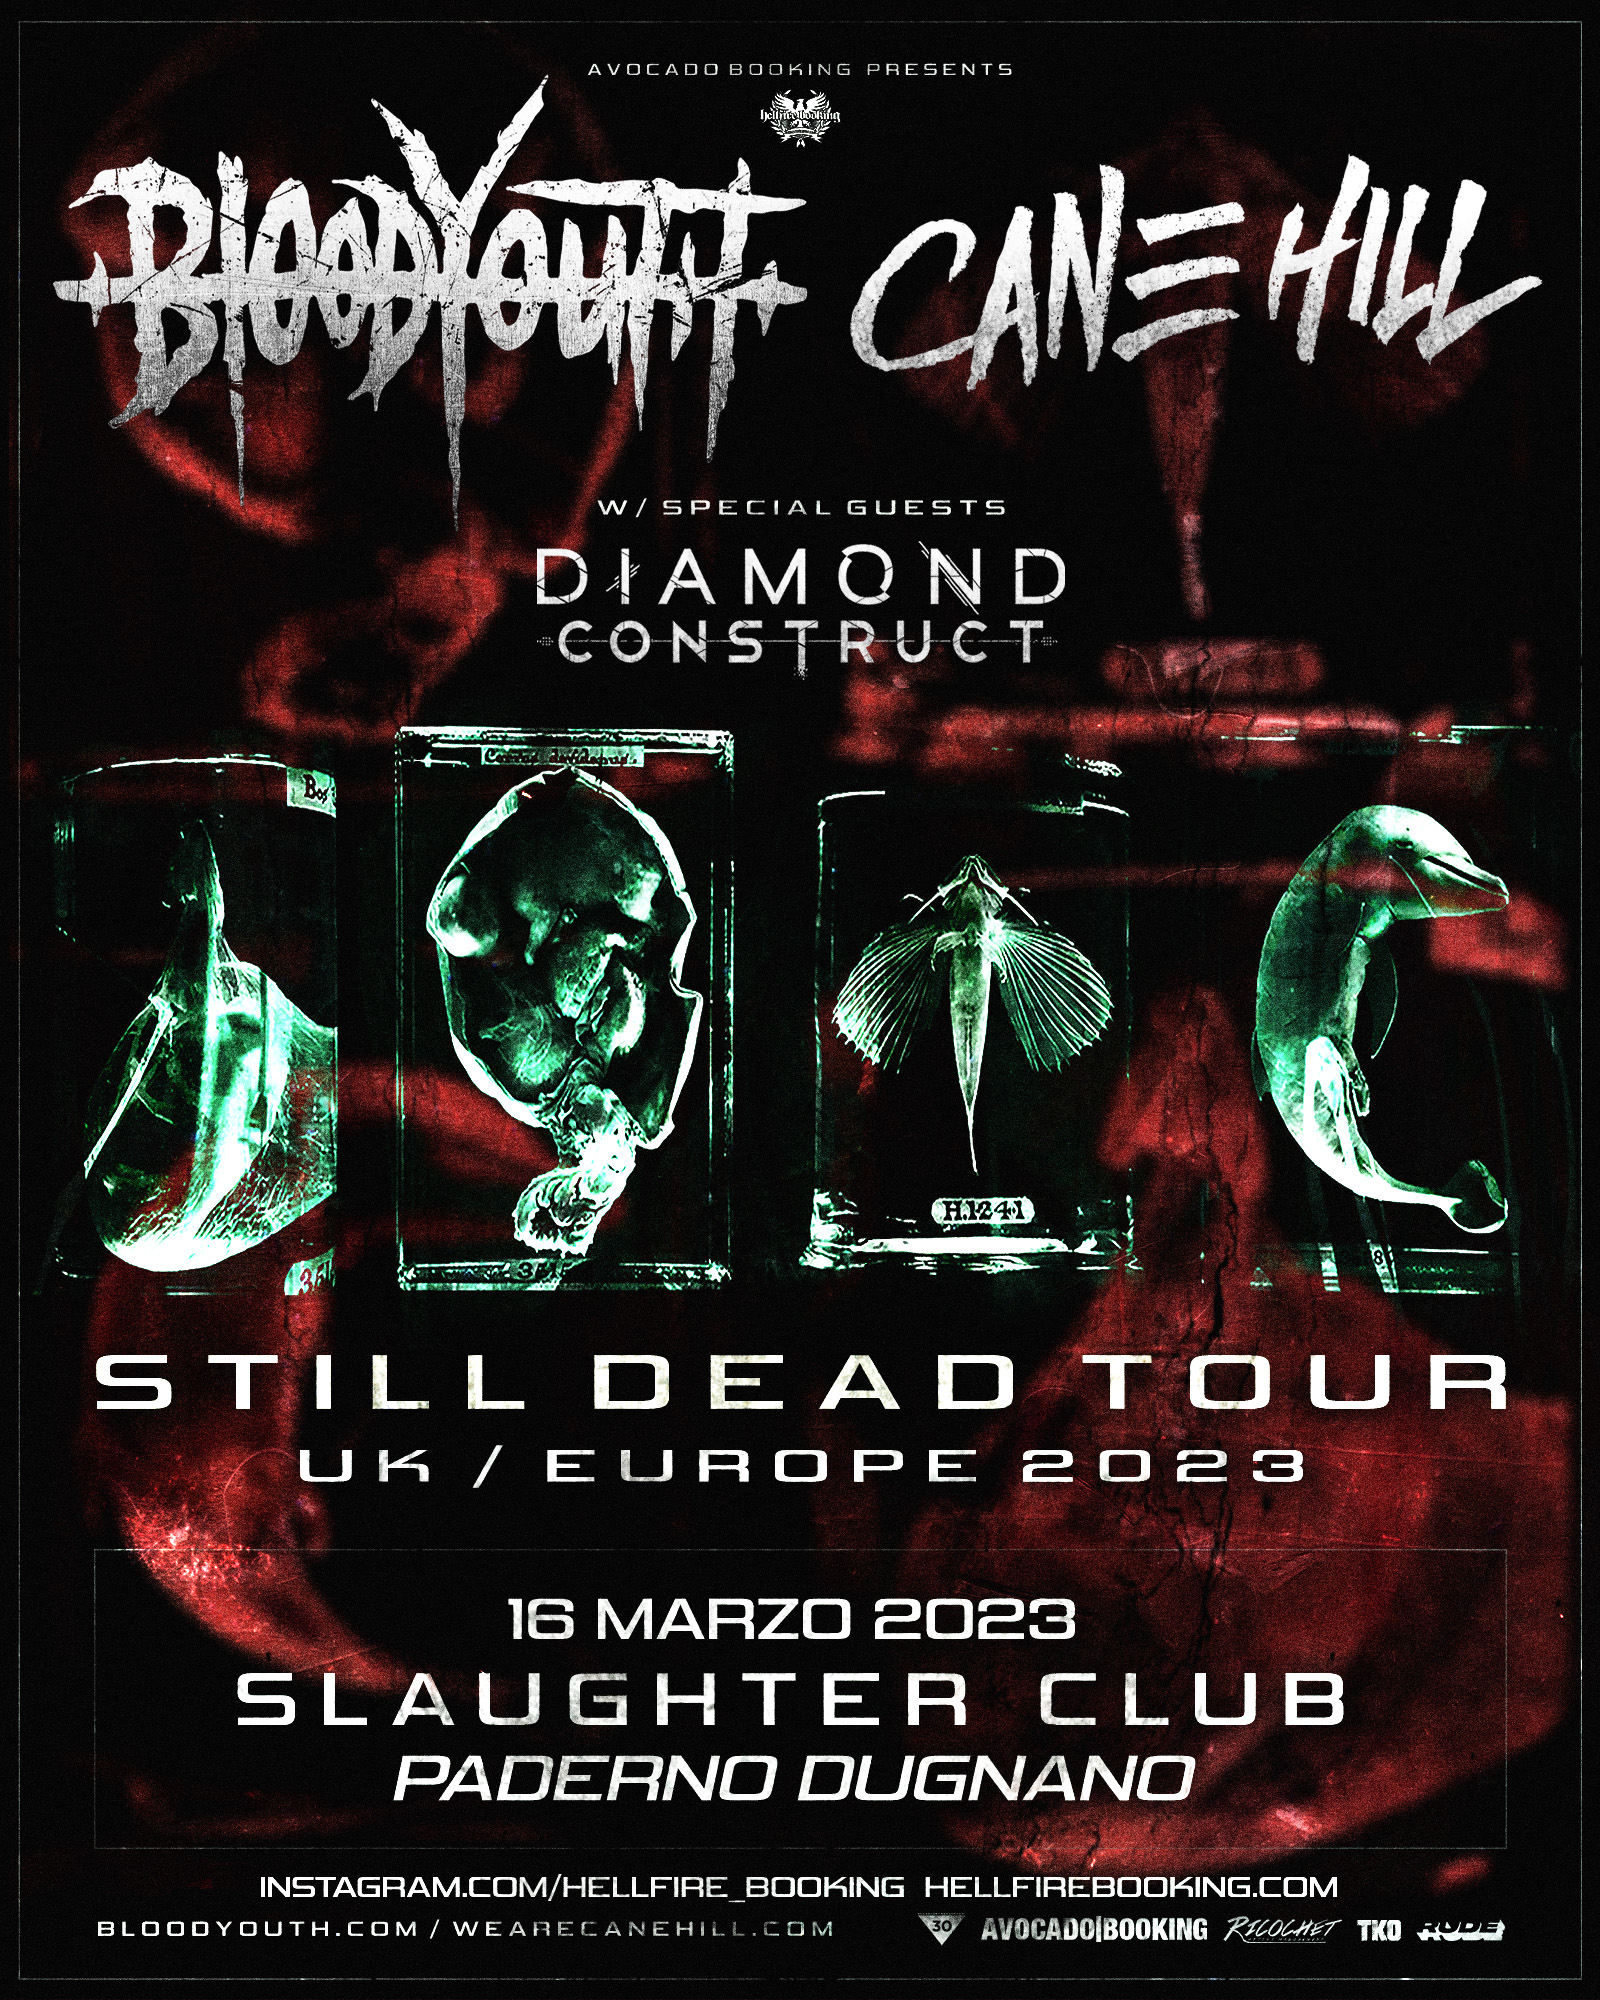 blood youth & cane hill